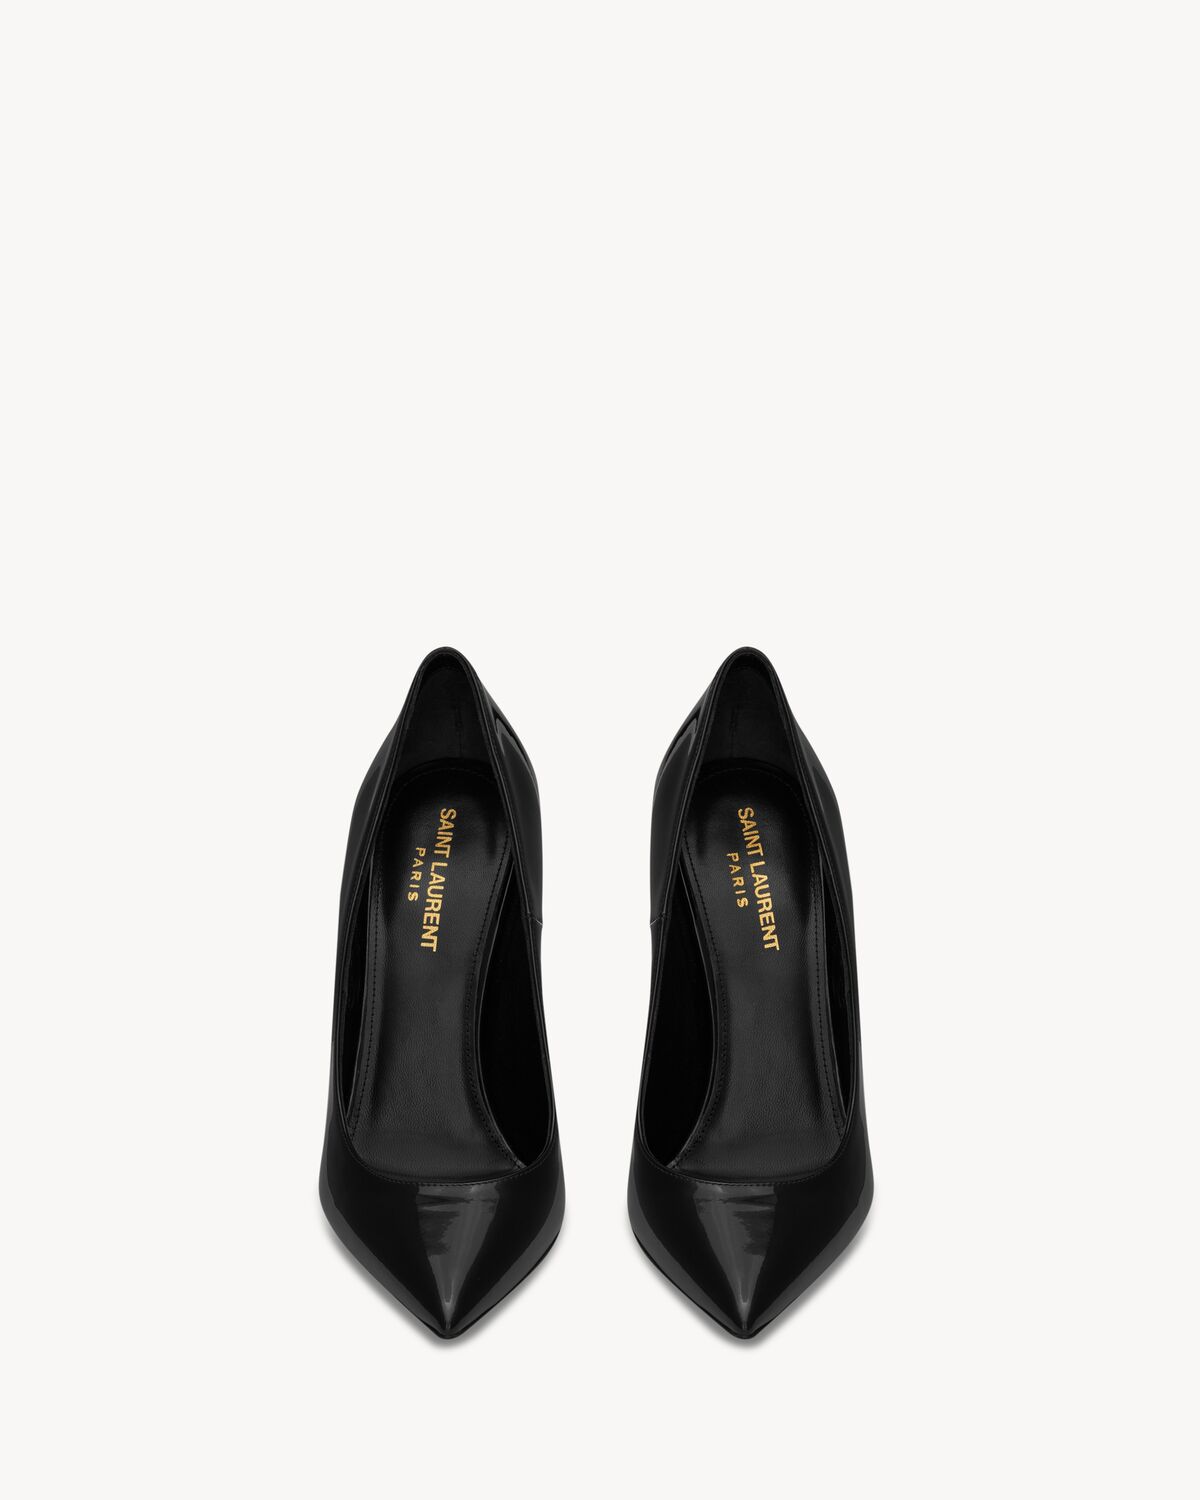 OPYUM Pumps in patent leather